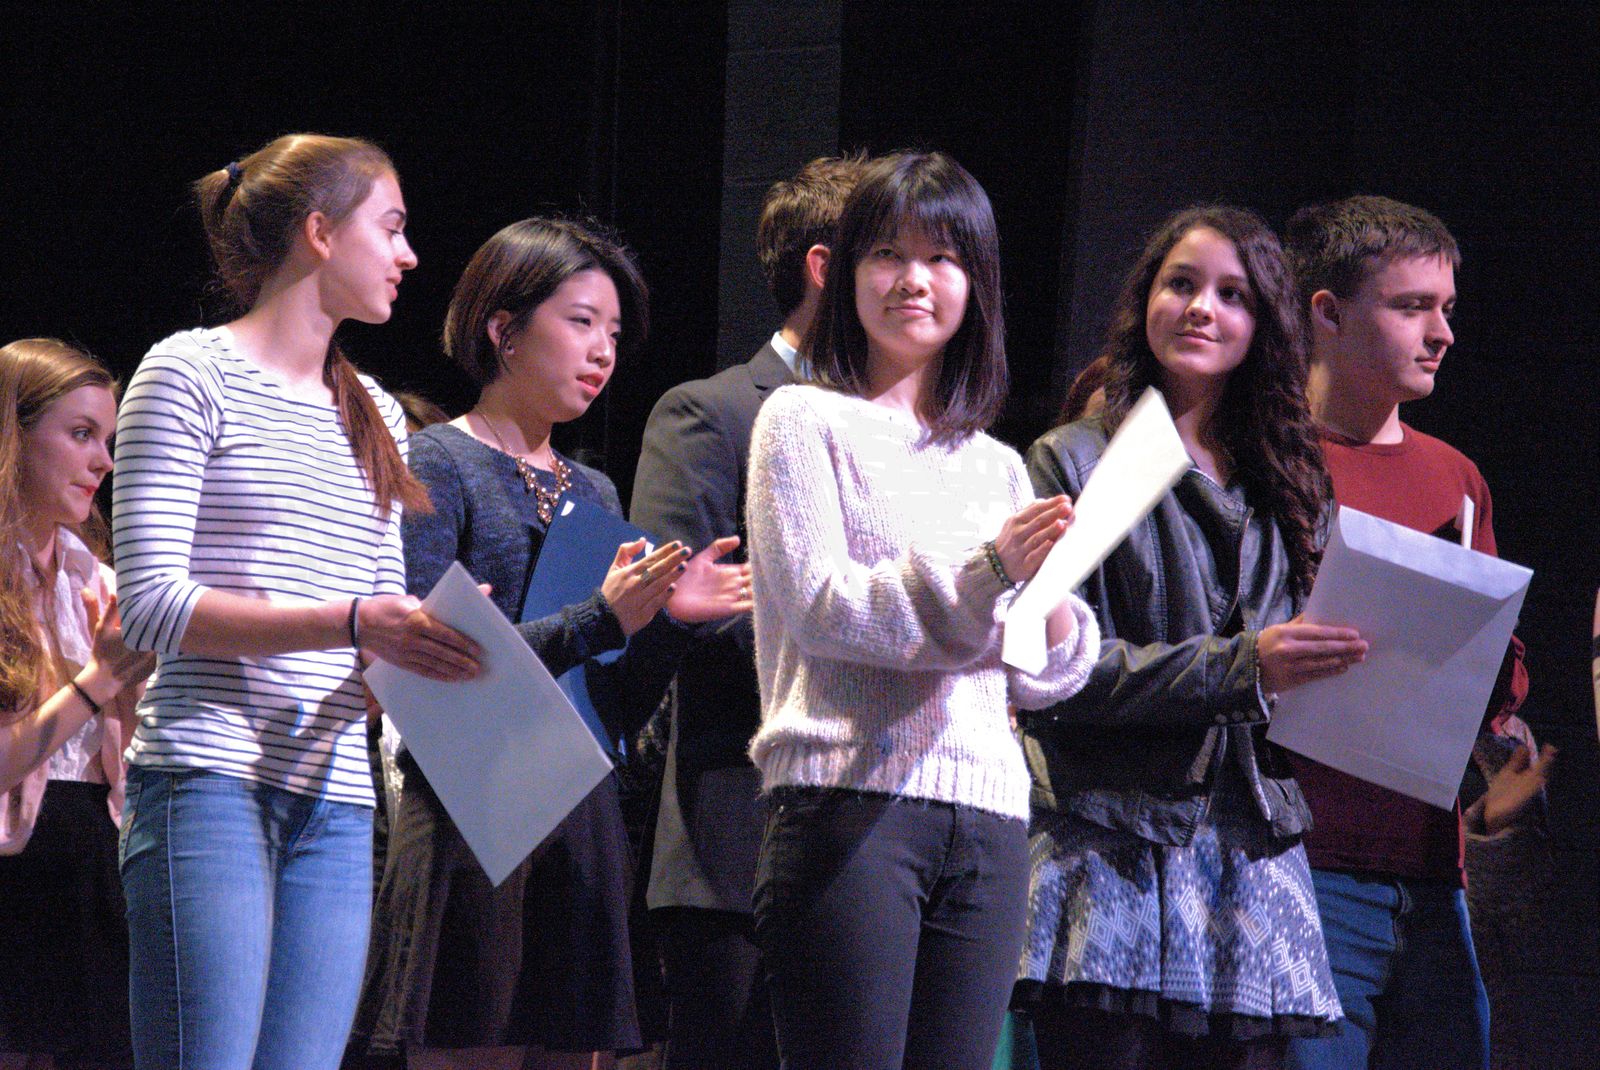 Student Group at the Art Awards